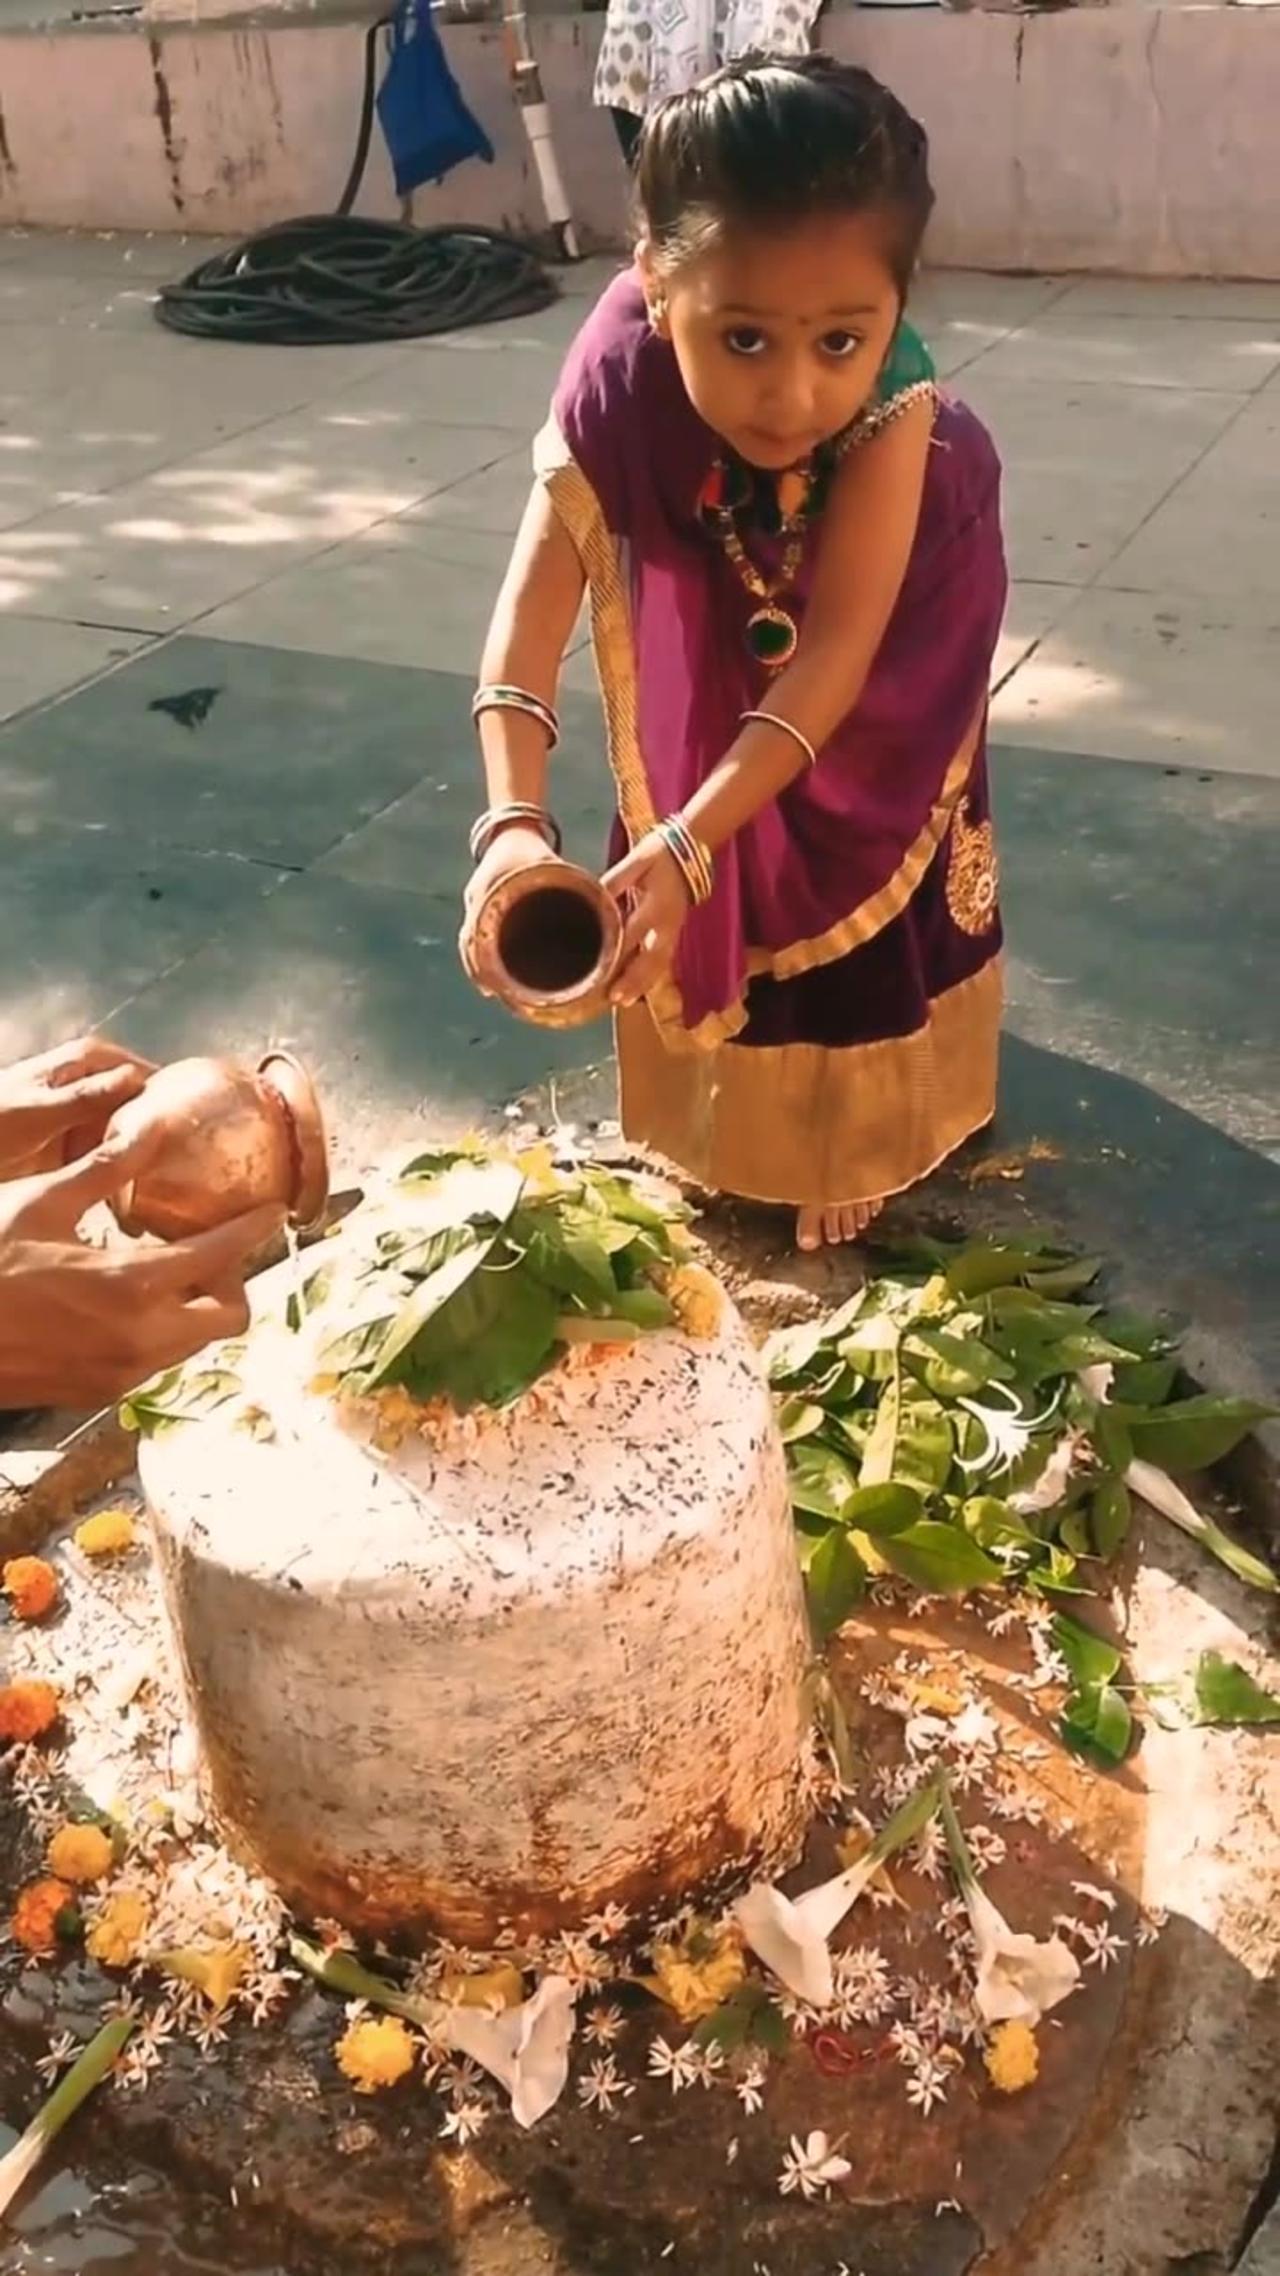 "Pure Devotion: 3-Year-Old Girl's Heartwarming Puja to Lord Shiva"